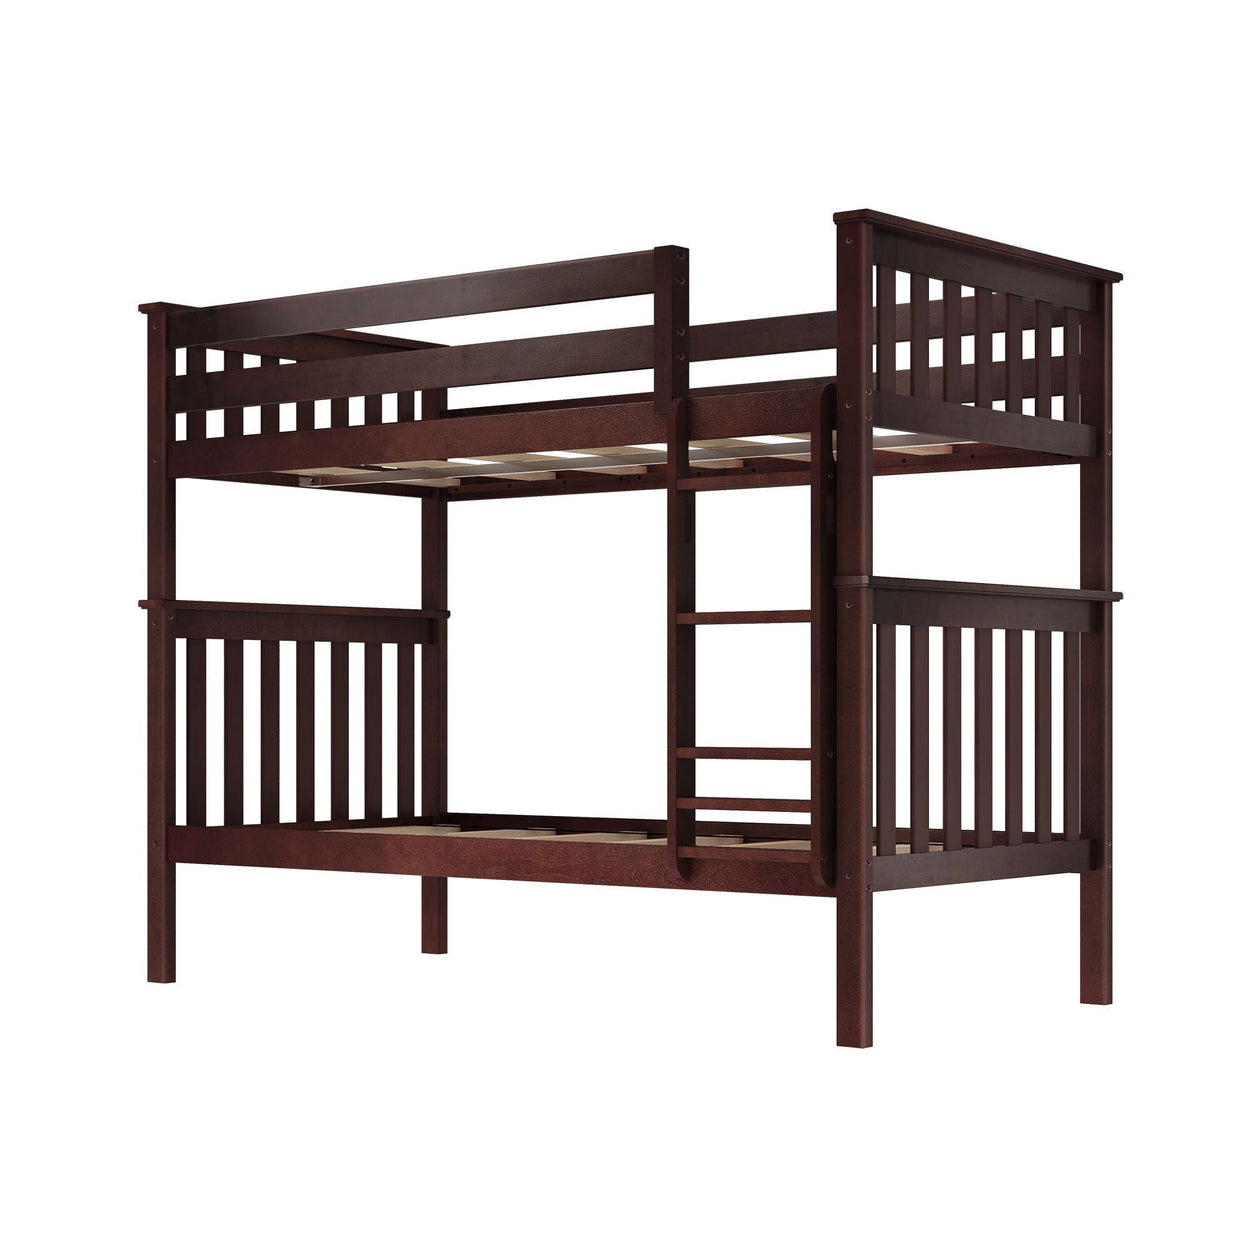 180201-005 : Bunk Beds Classic Twin over Twin Bunk Bed, Espresso